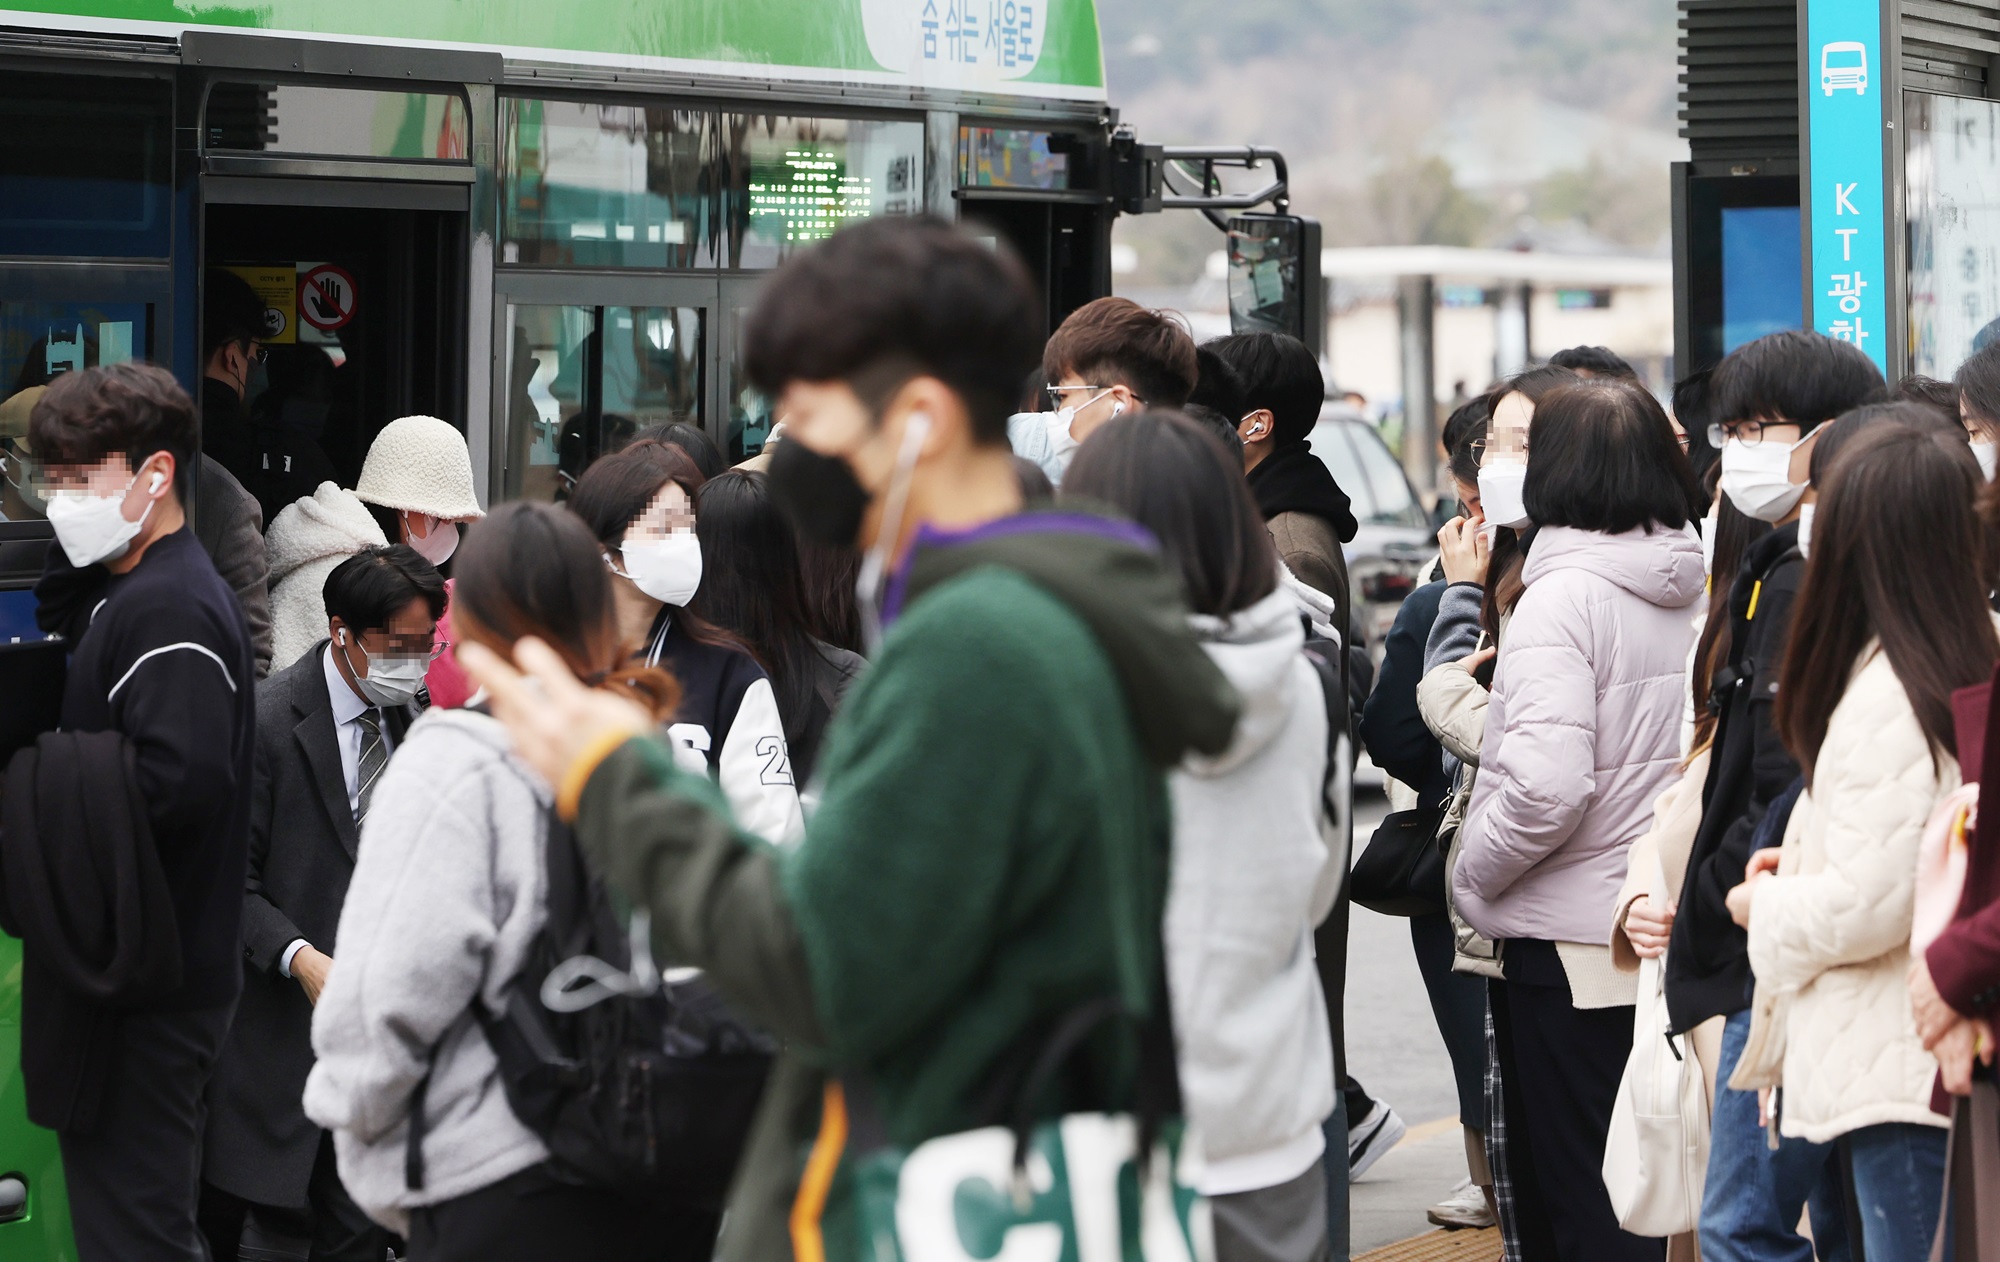 The national rule requiring mask wearing will be scrapped on March 20 on public transportation like buses and subways and at pharmacies located in large open spaces like hypermarkets or train stations.